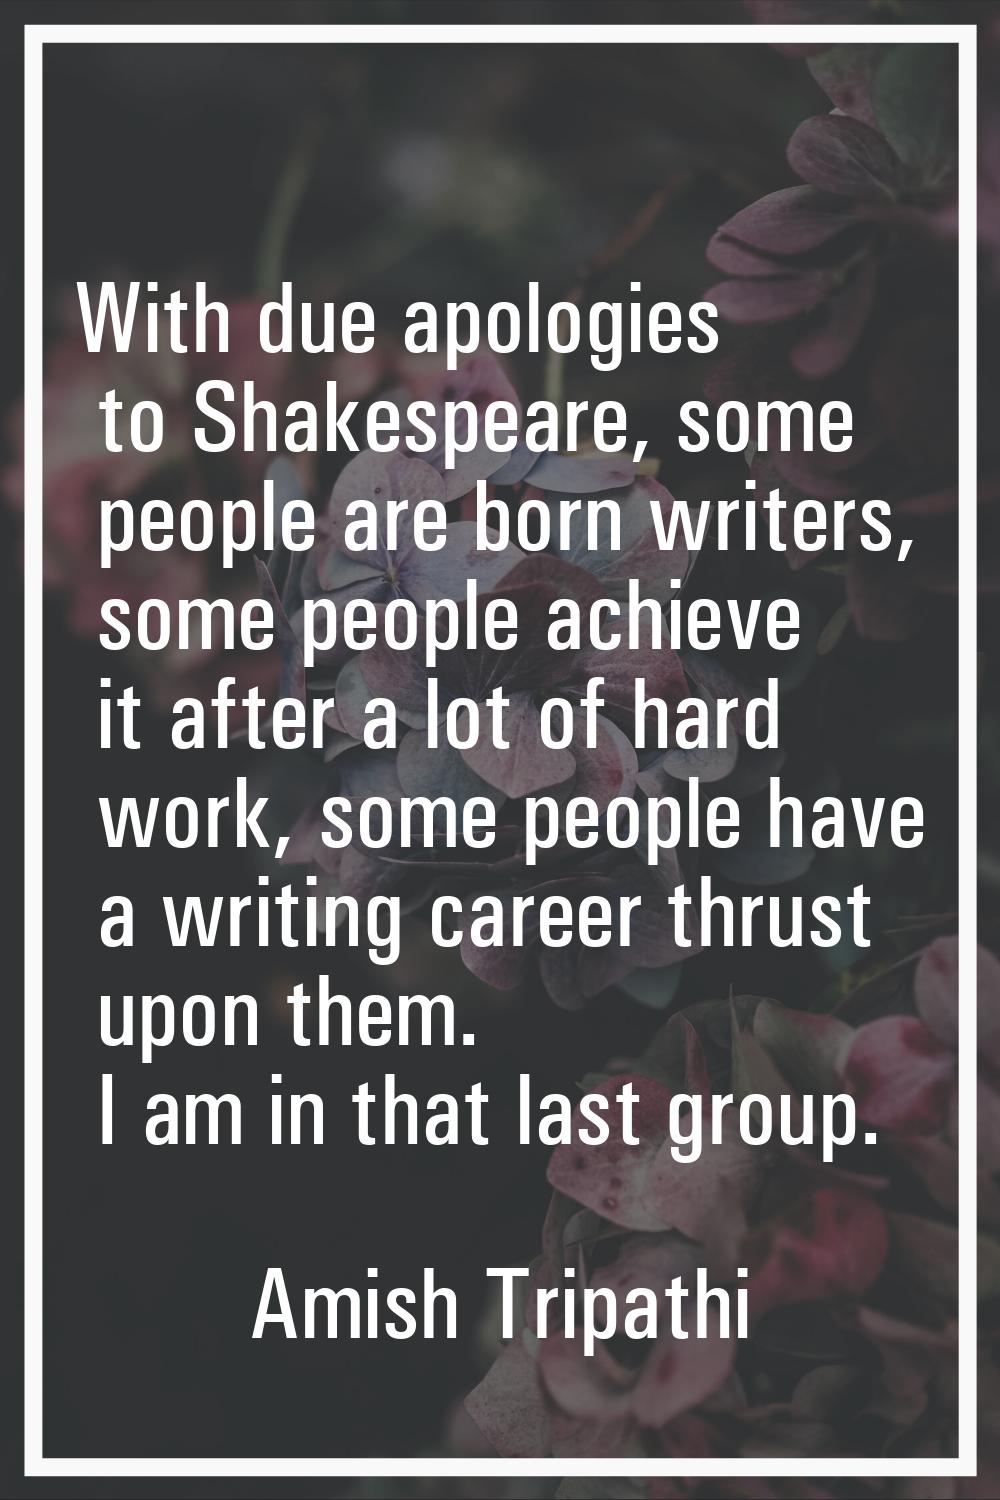 With due apologies to Shakespeare, some people are born writers, some people achieve it after a lot